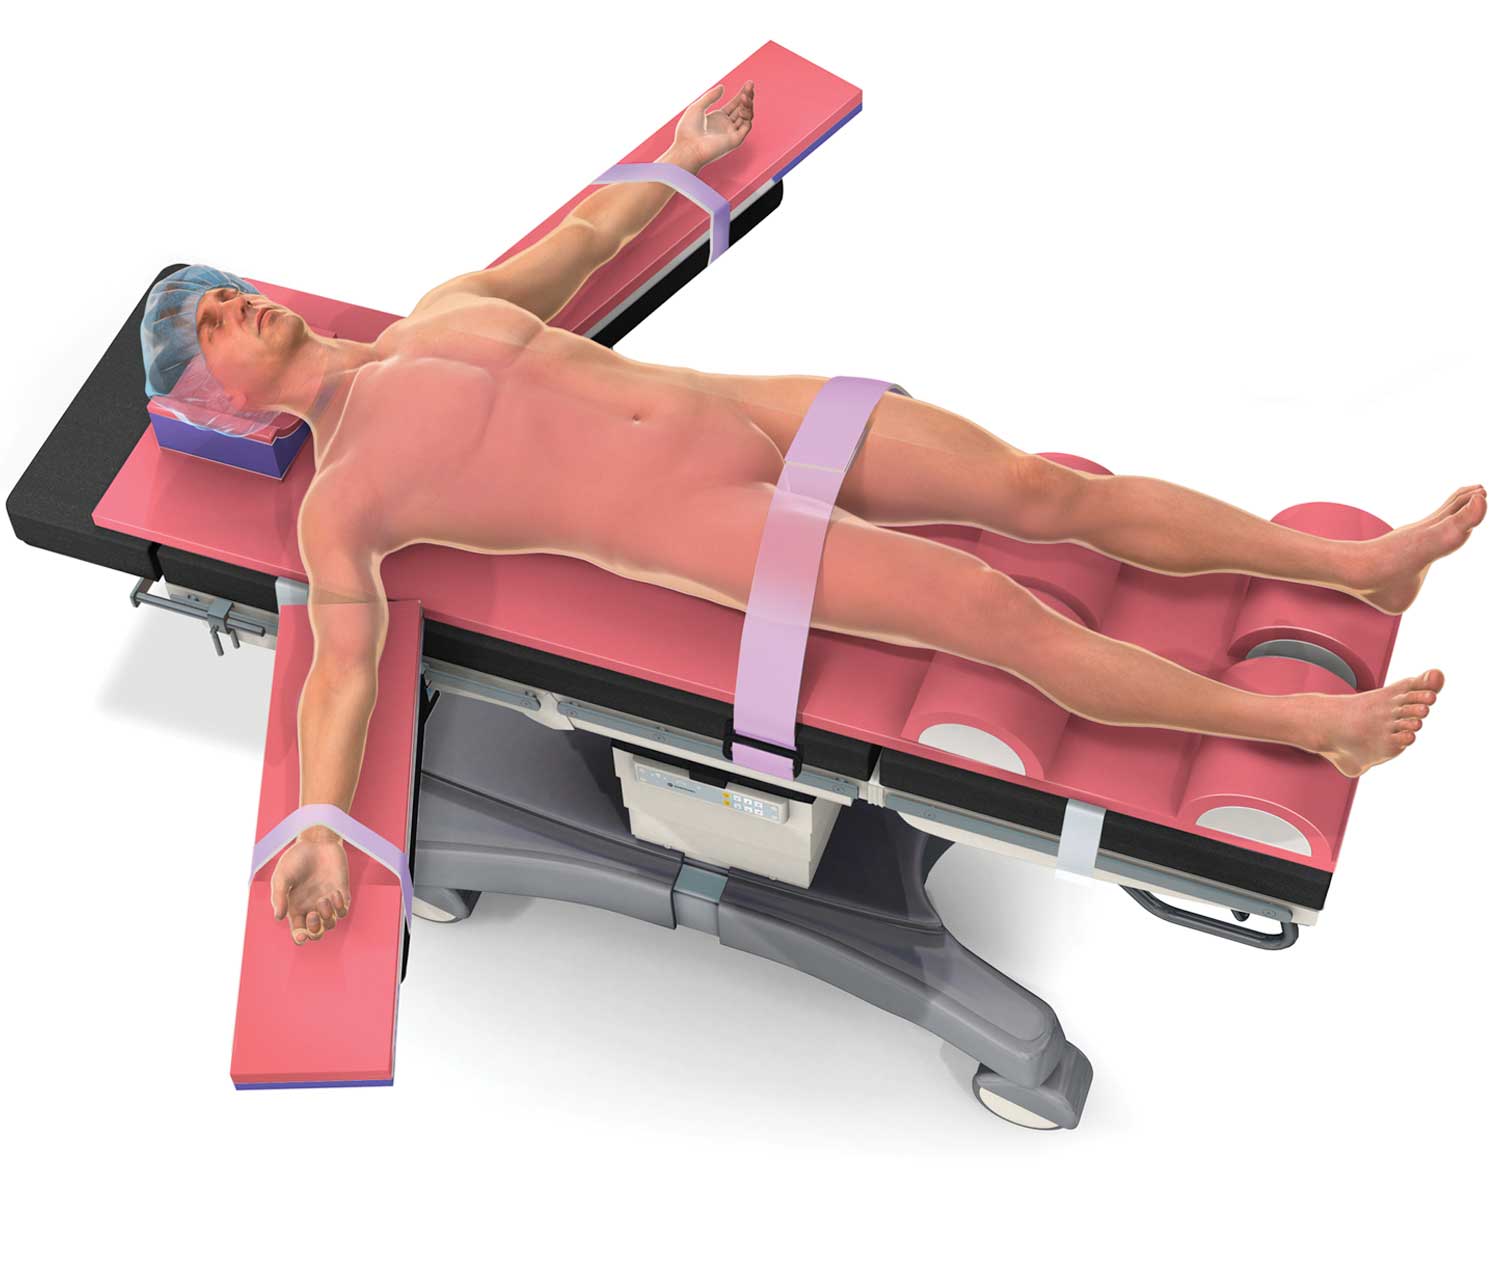 Supine Position Example